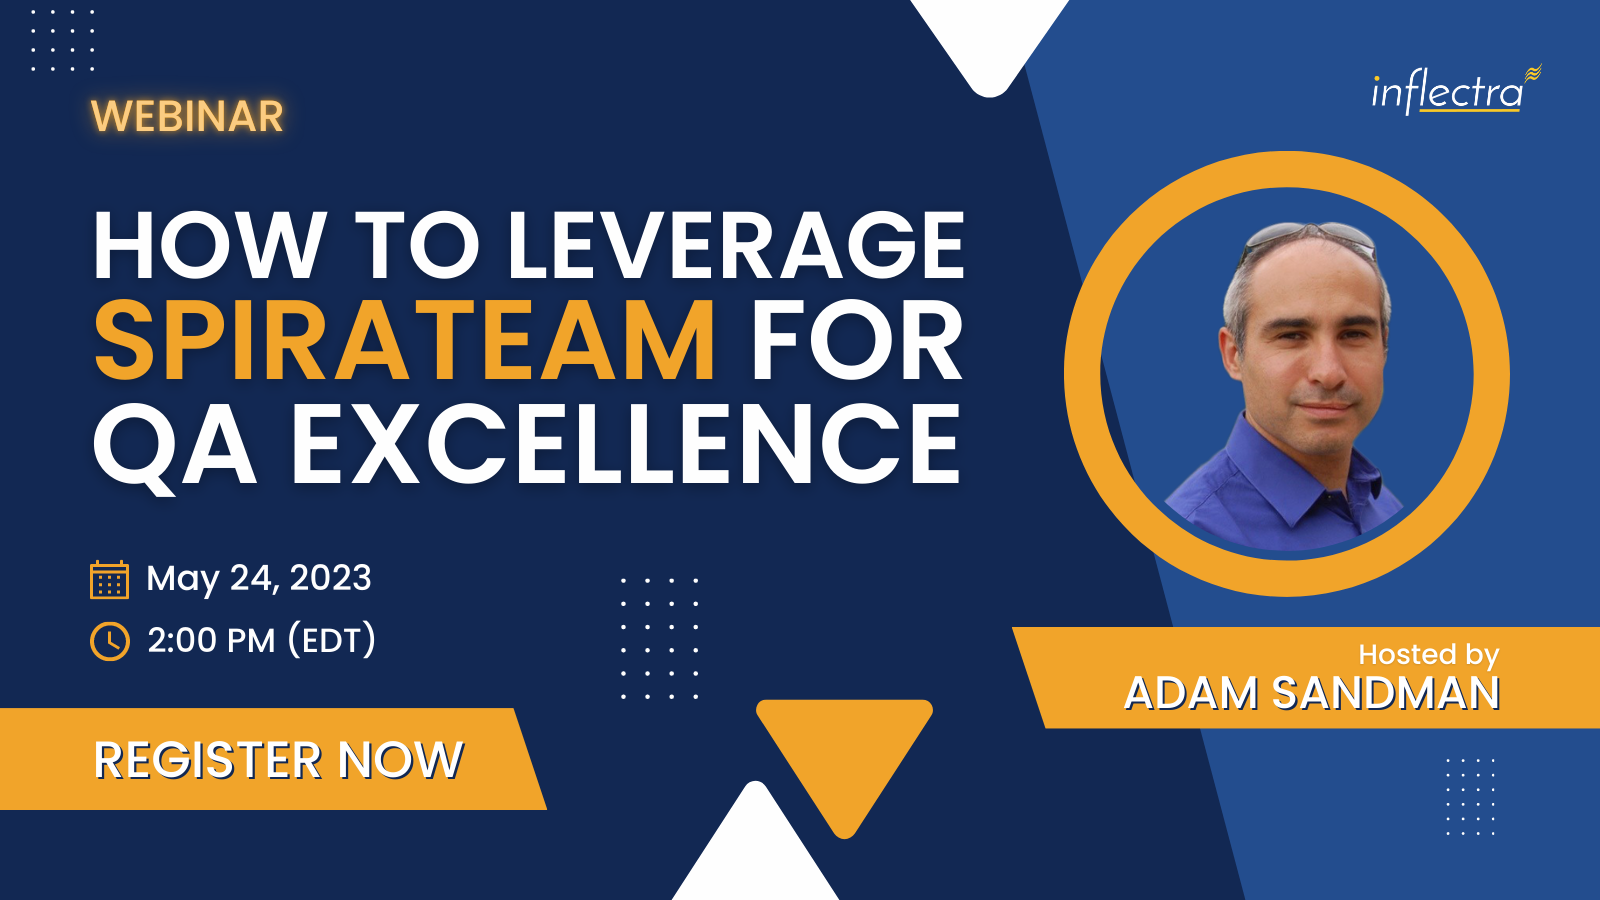 inflectra-webinar-how-to-leverage-spirateam-for-quality-assuarance-excellence-with-adam-sandman-image